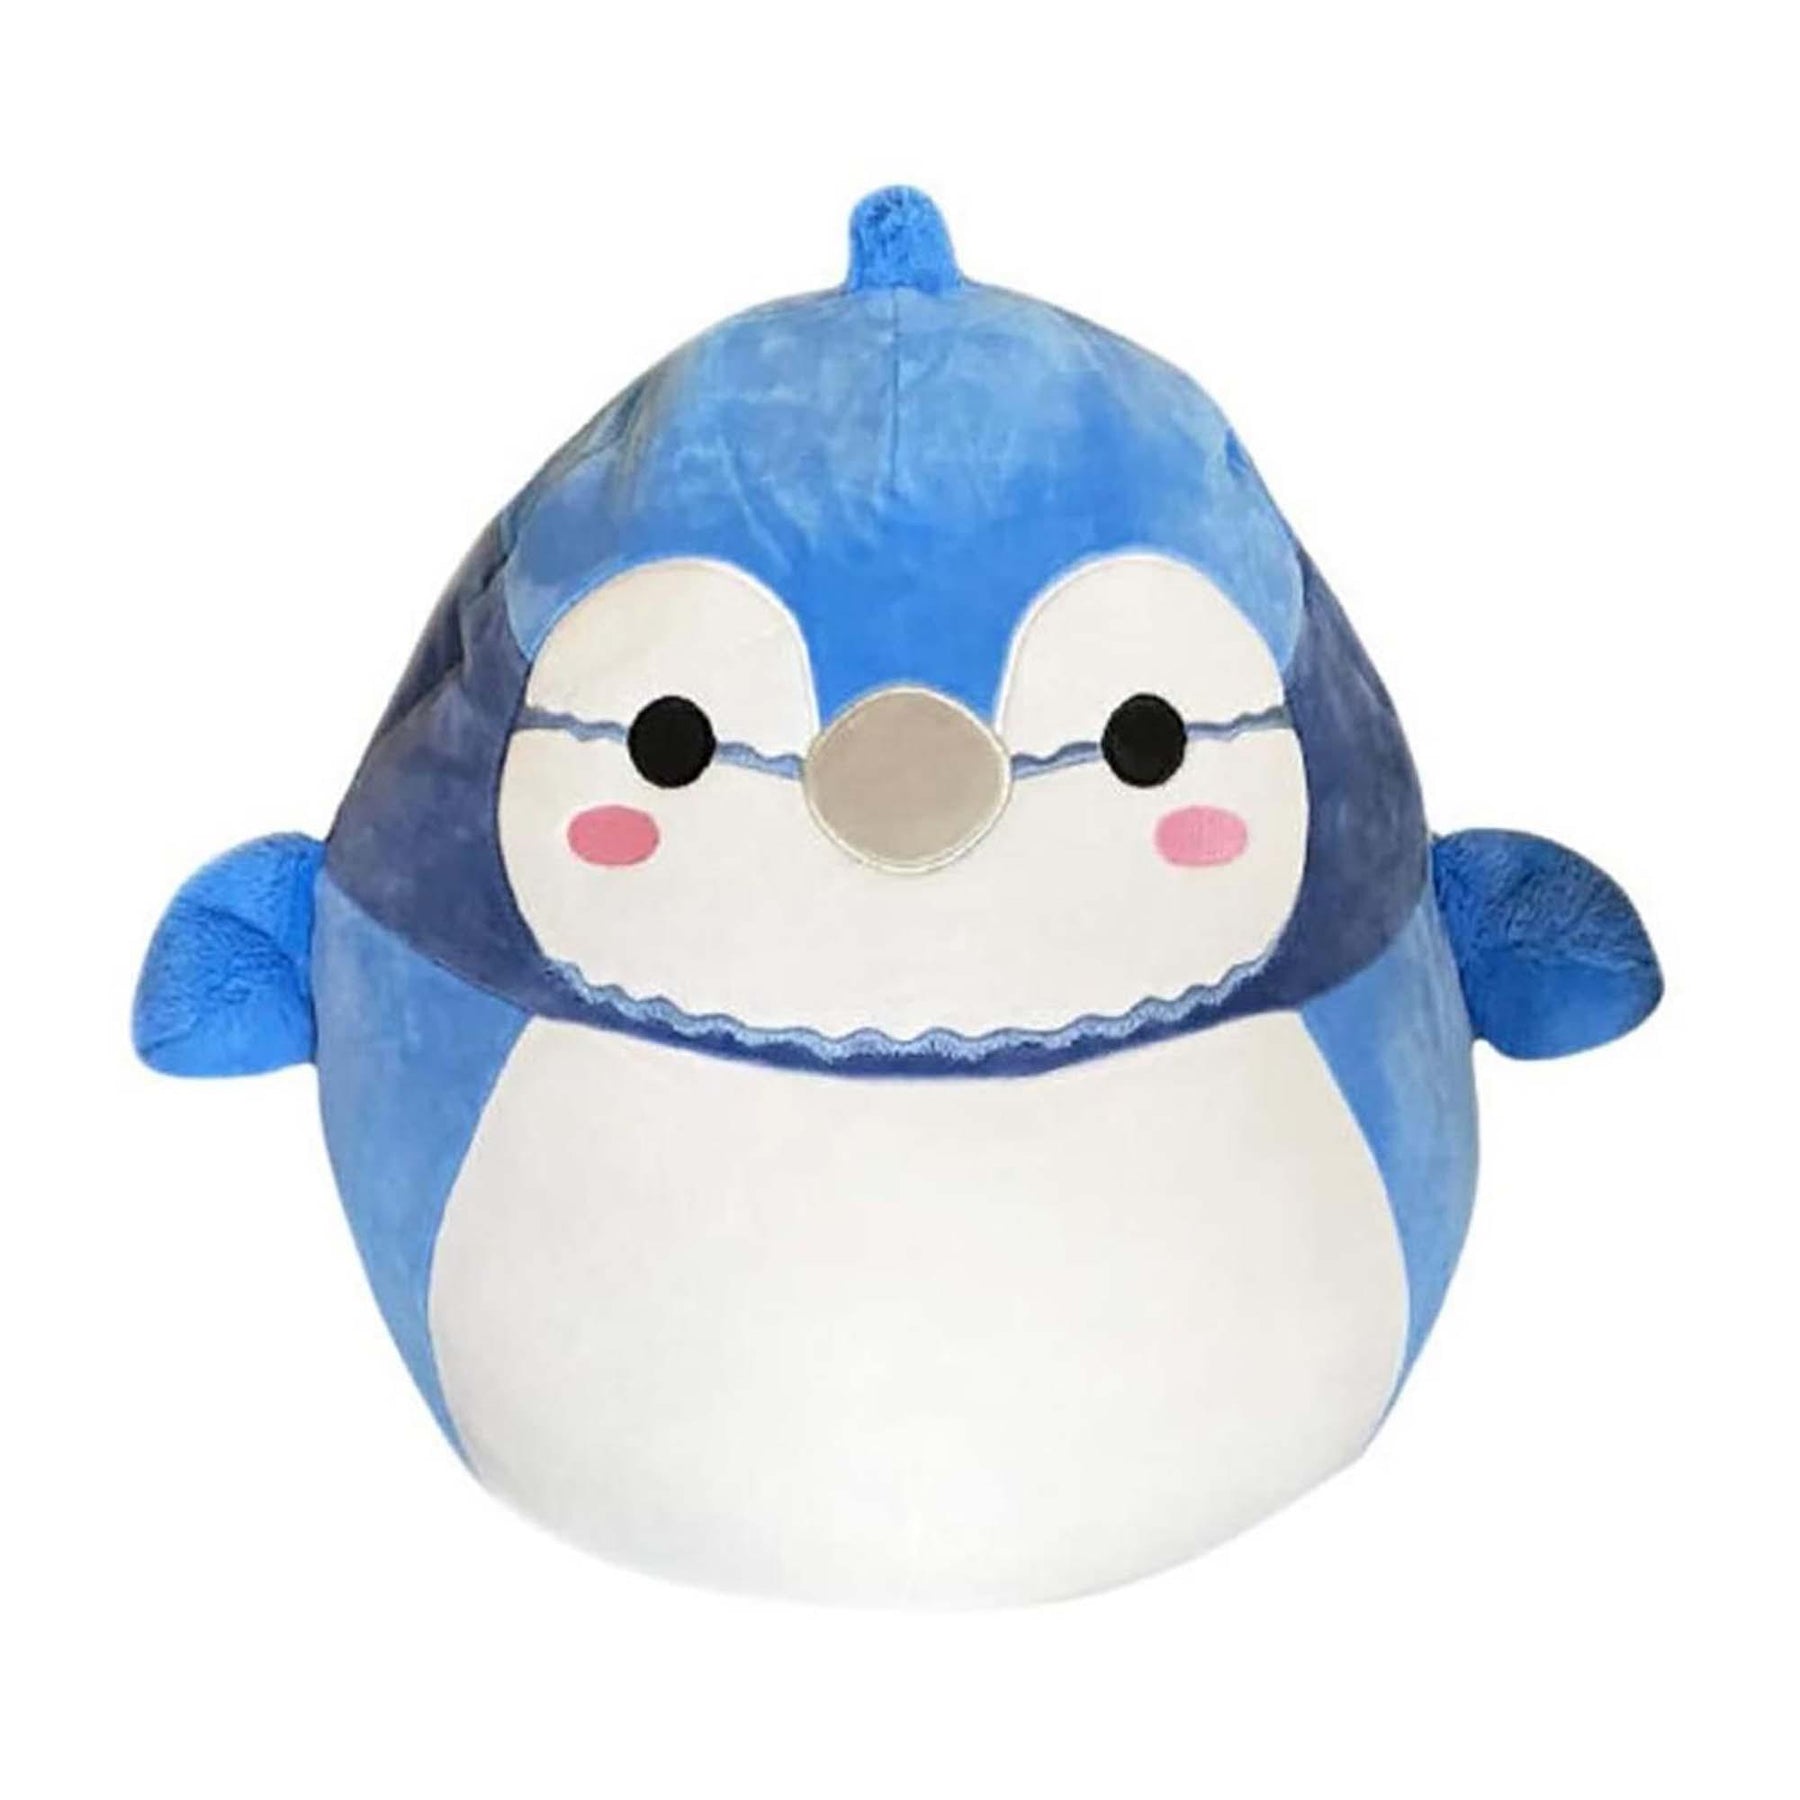 Squishmallow 5 Inch Plush | Babs the Blue Jay